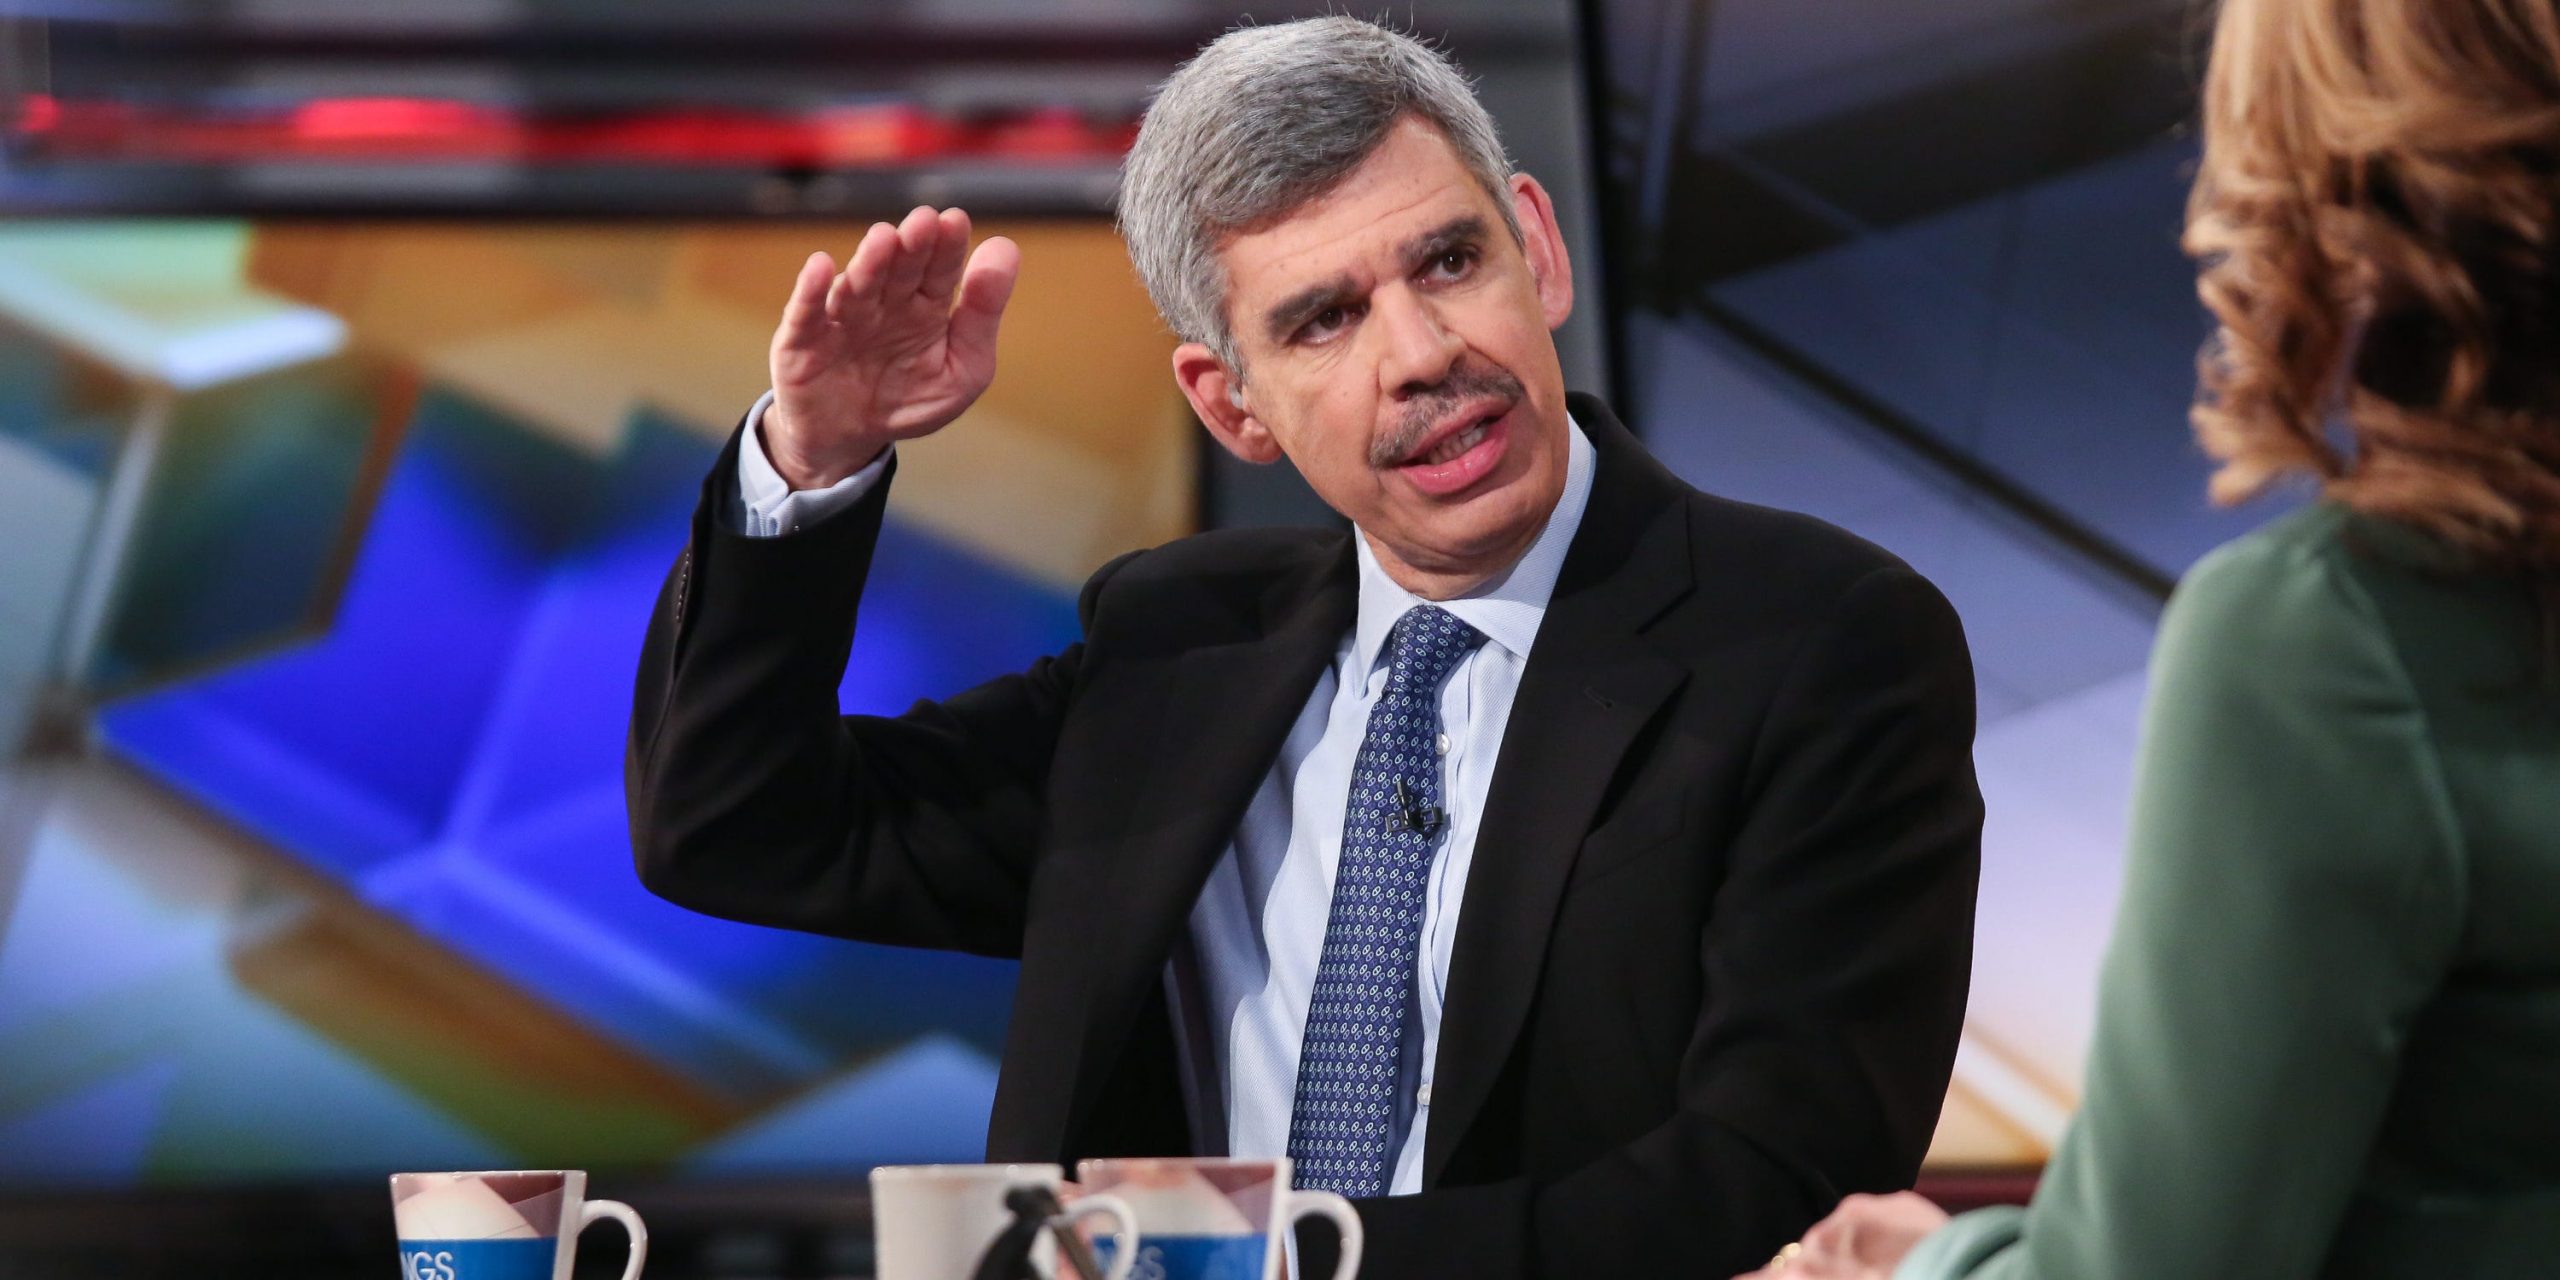 Mohamed El-Erian, Chief Economic Adviser of Allianz appears on a segment of "Mornings With Maria" with Maria Bartiromo on the FOX Business Network at FOX Studios on April 29, 2016 in New York City.